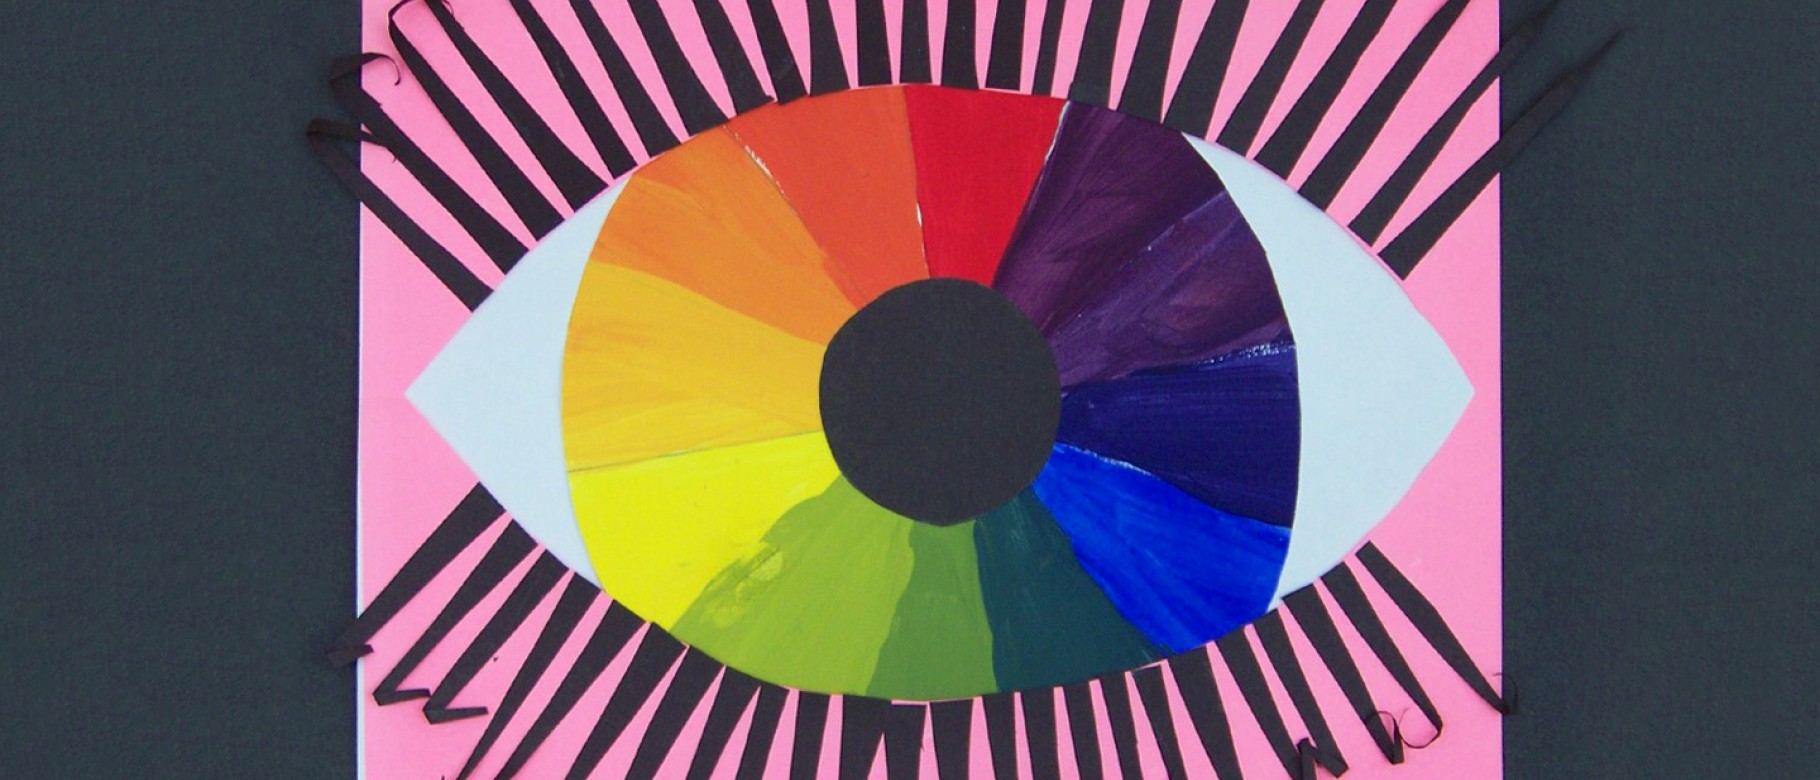 "Eyeball Color Wheel" by Madison Smith, Dayton Consolidated School